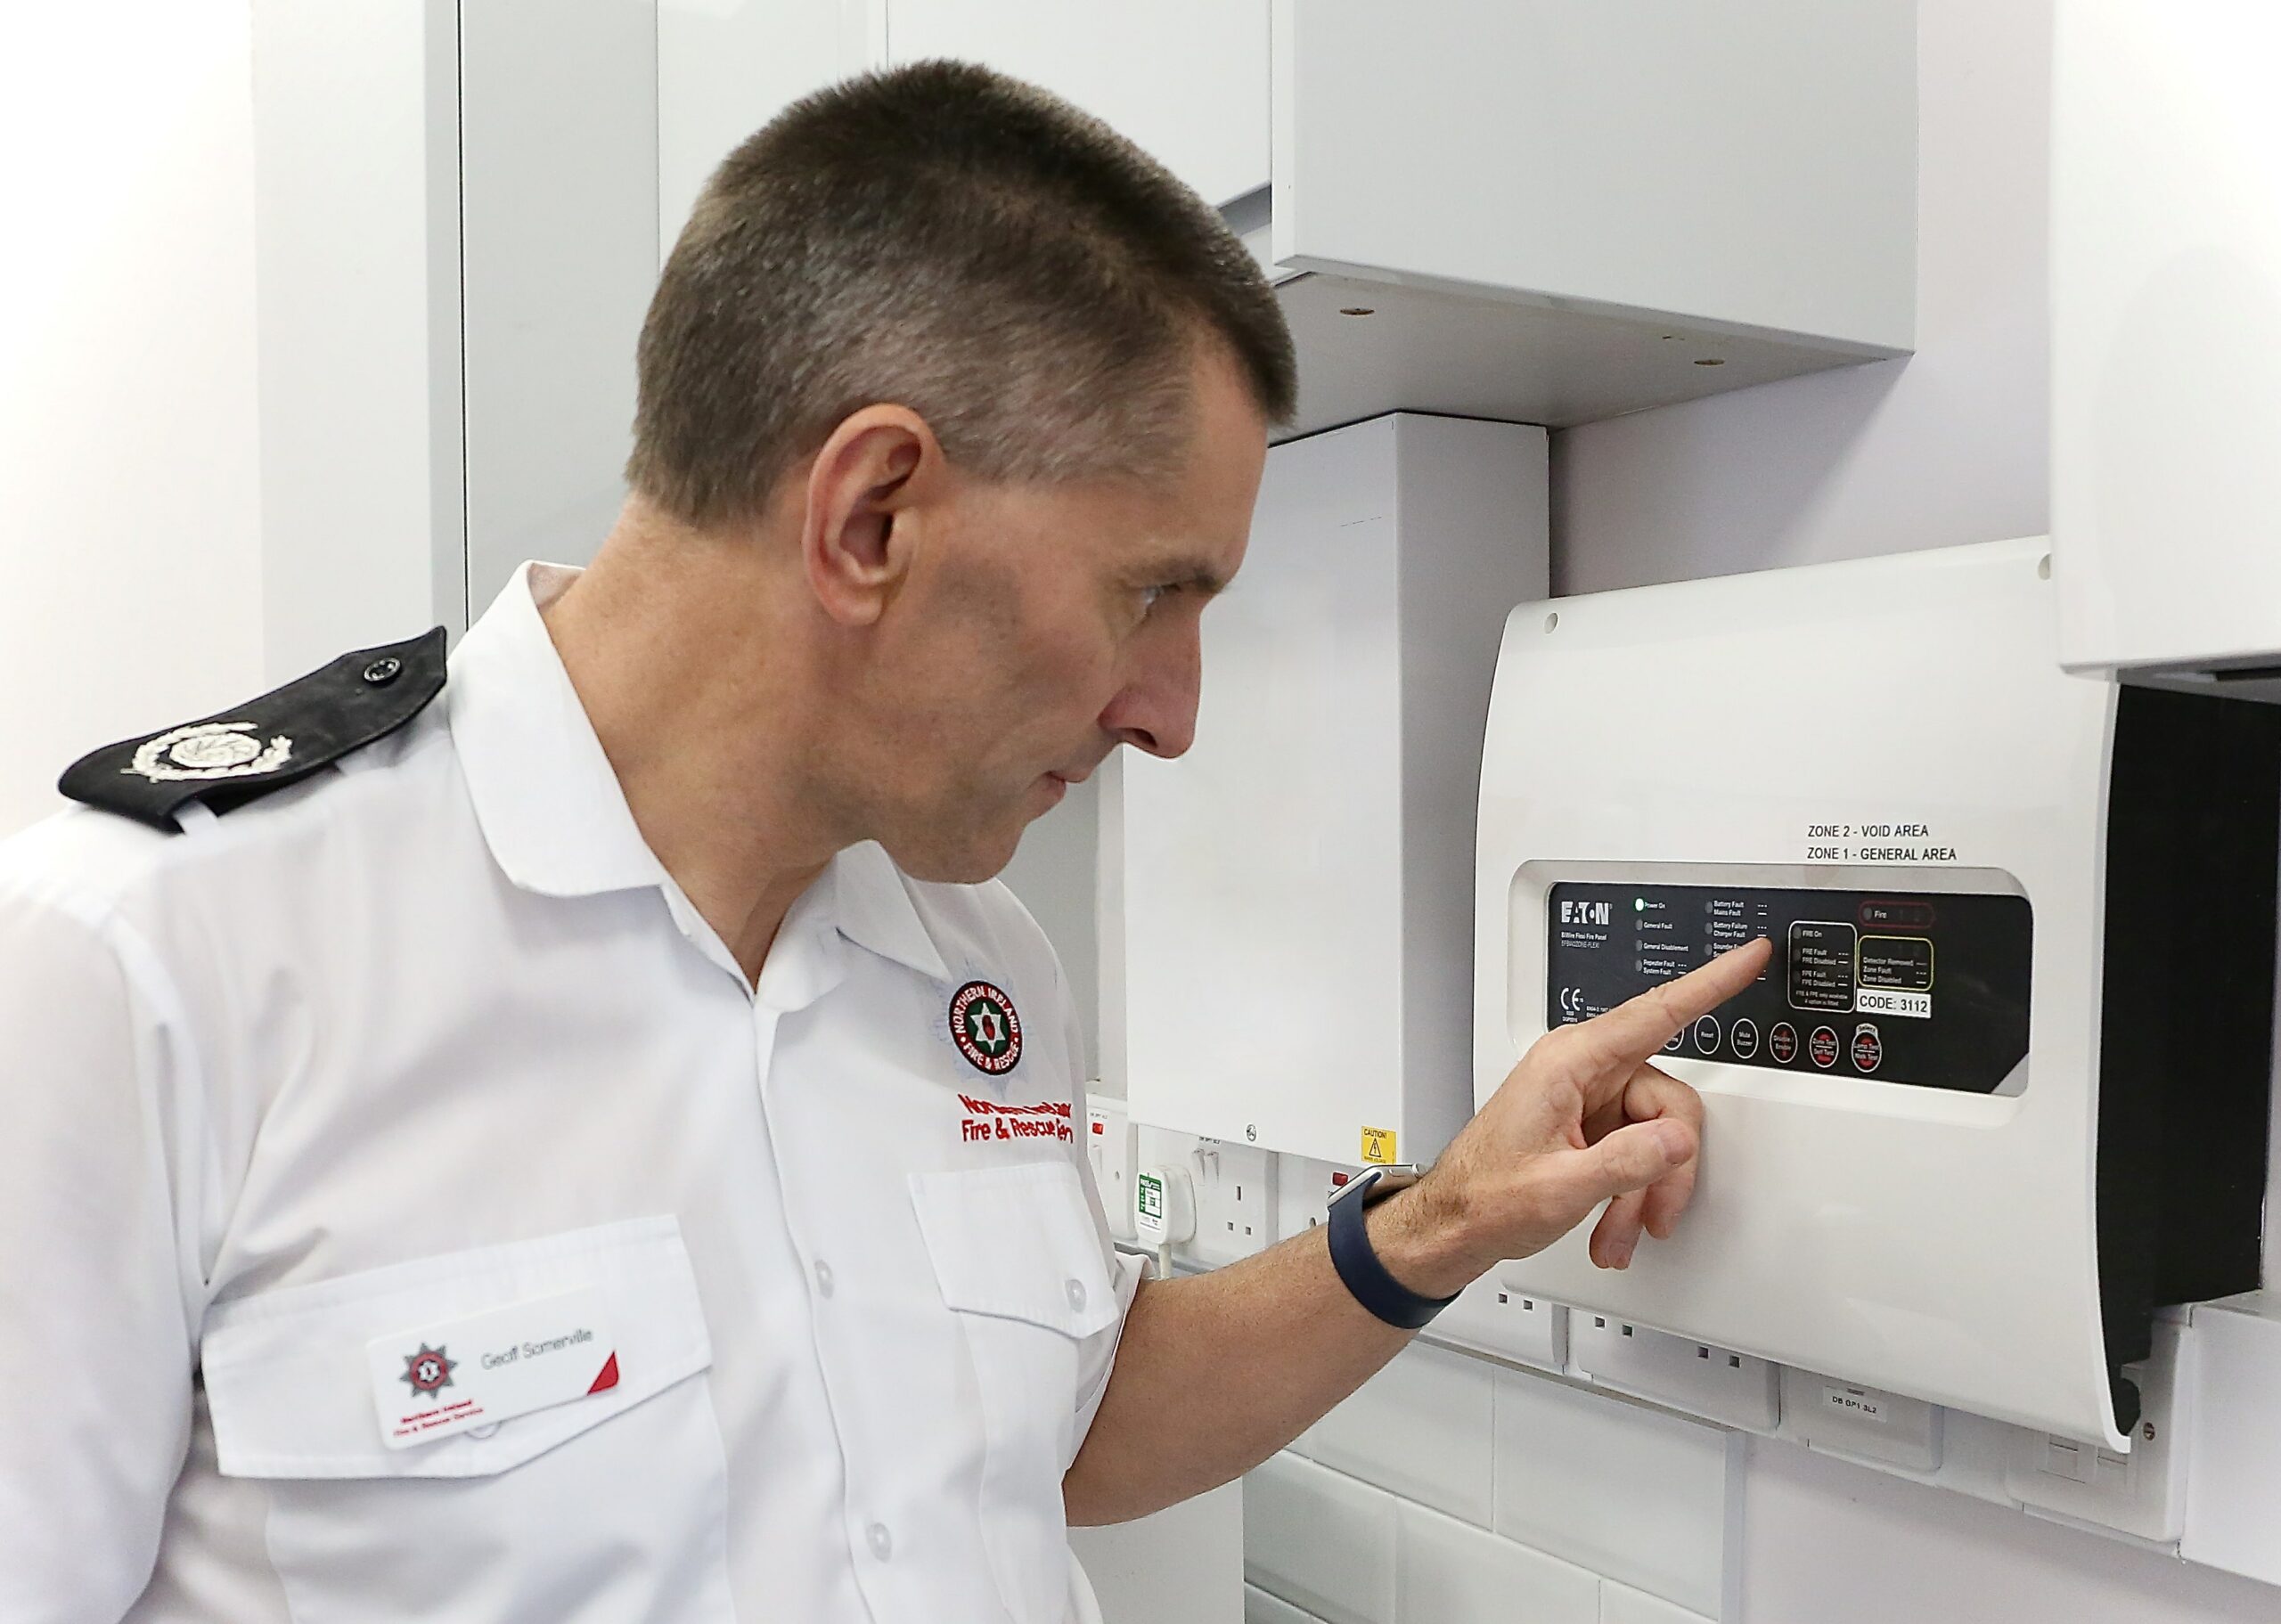 Northern Ireland Fire & Rescue Service Group Commander Geoff Somerville inspects an automatic fire alarm system